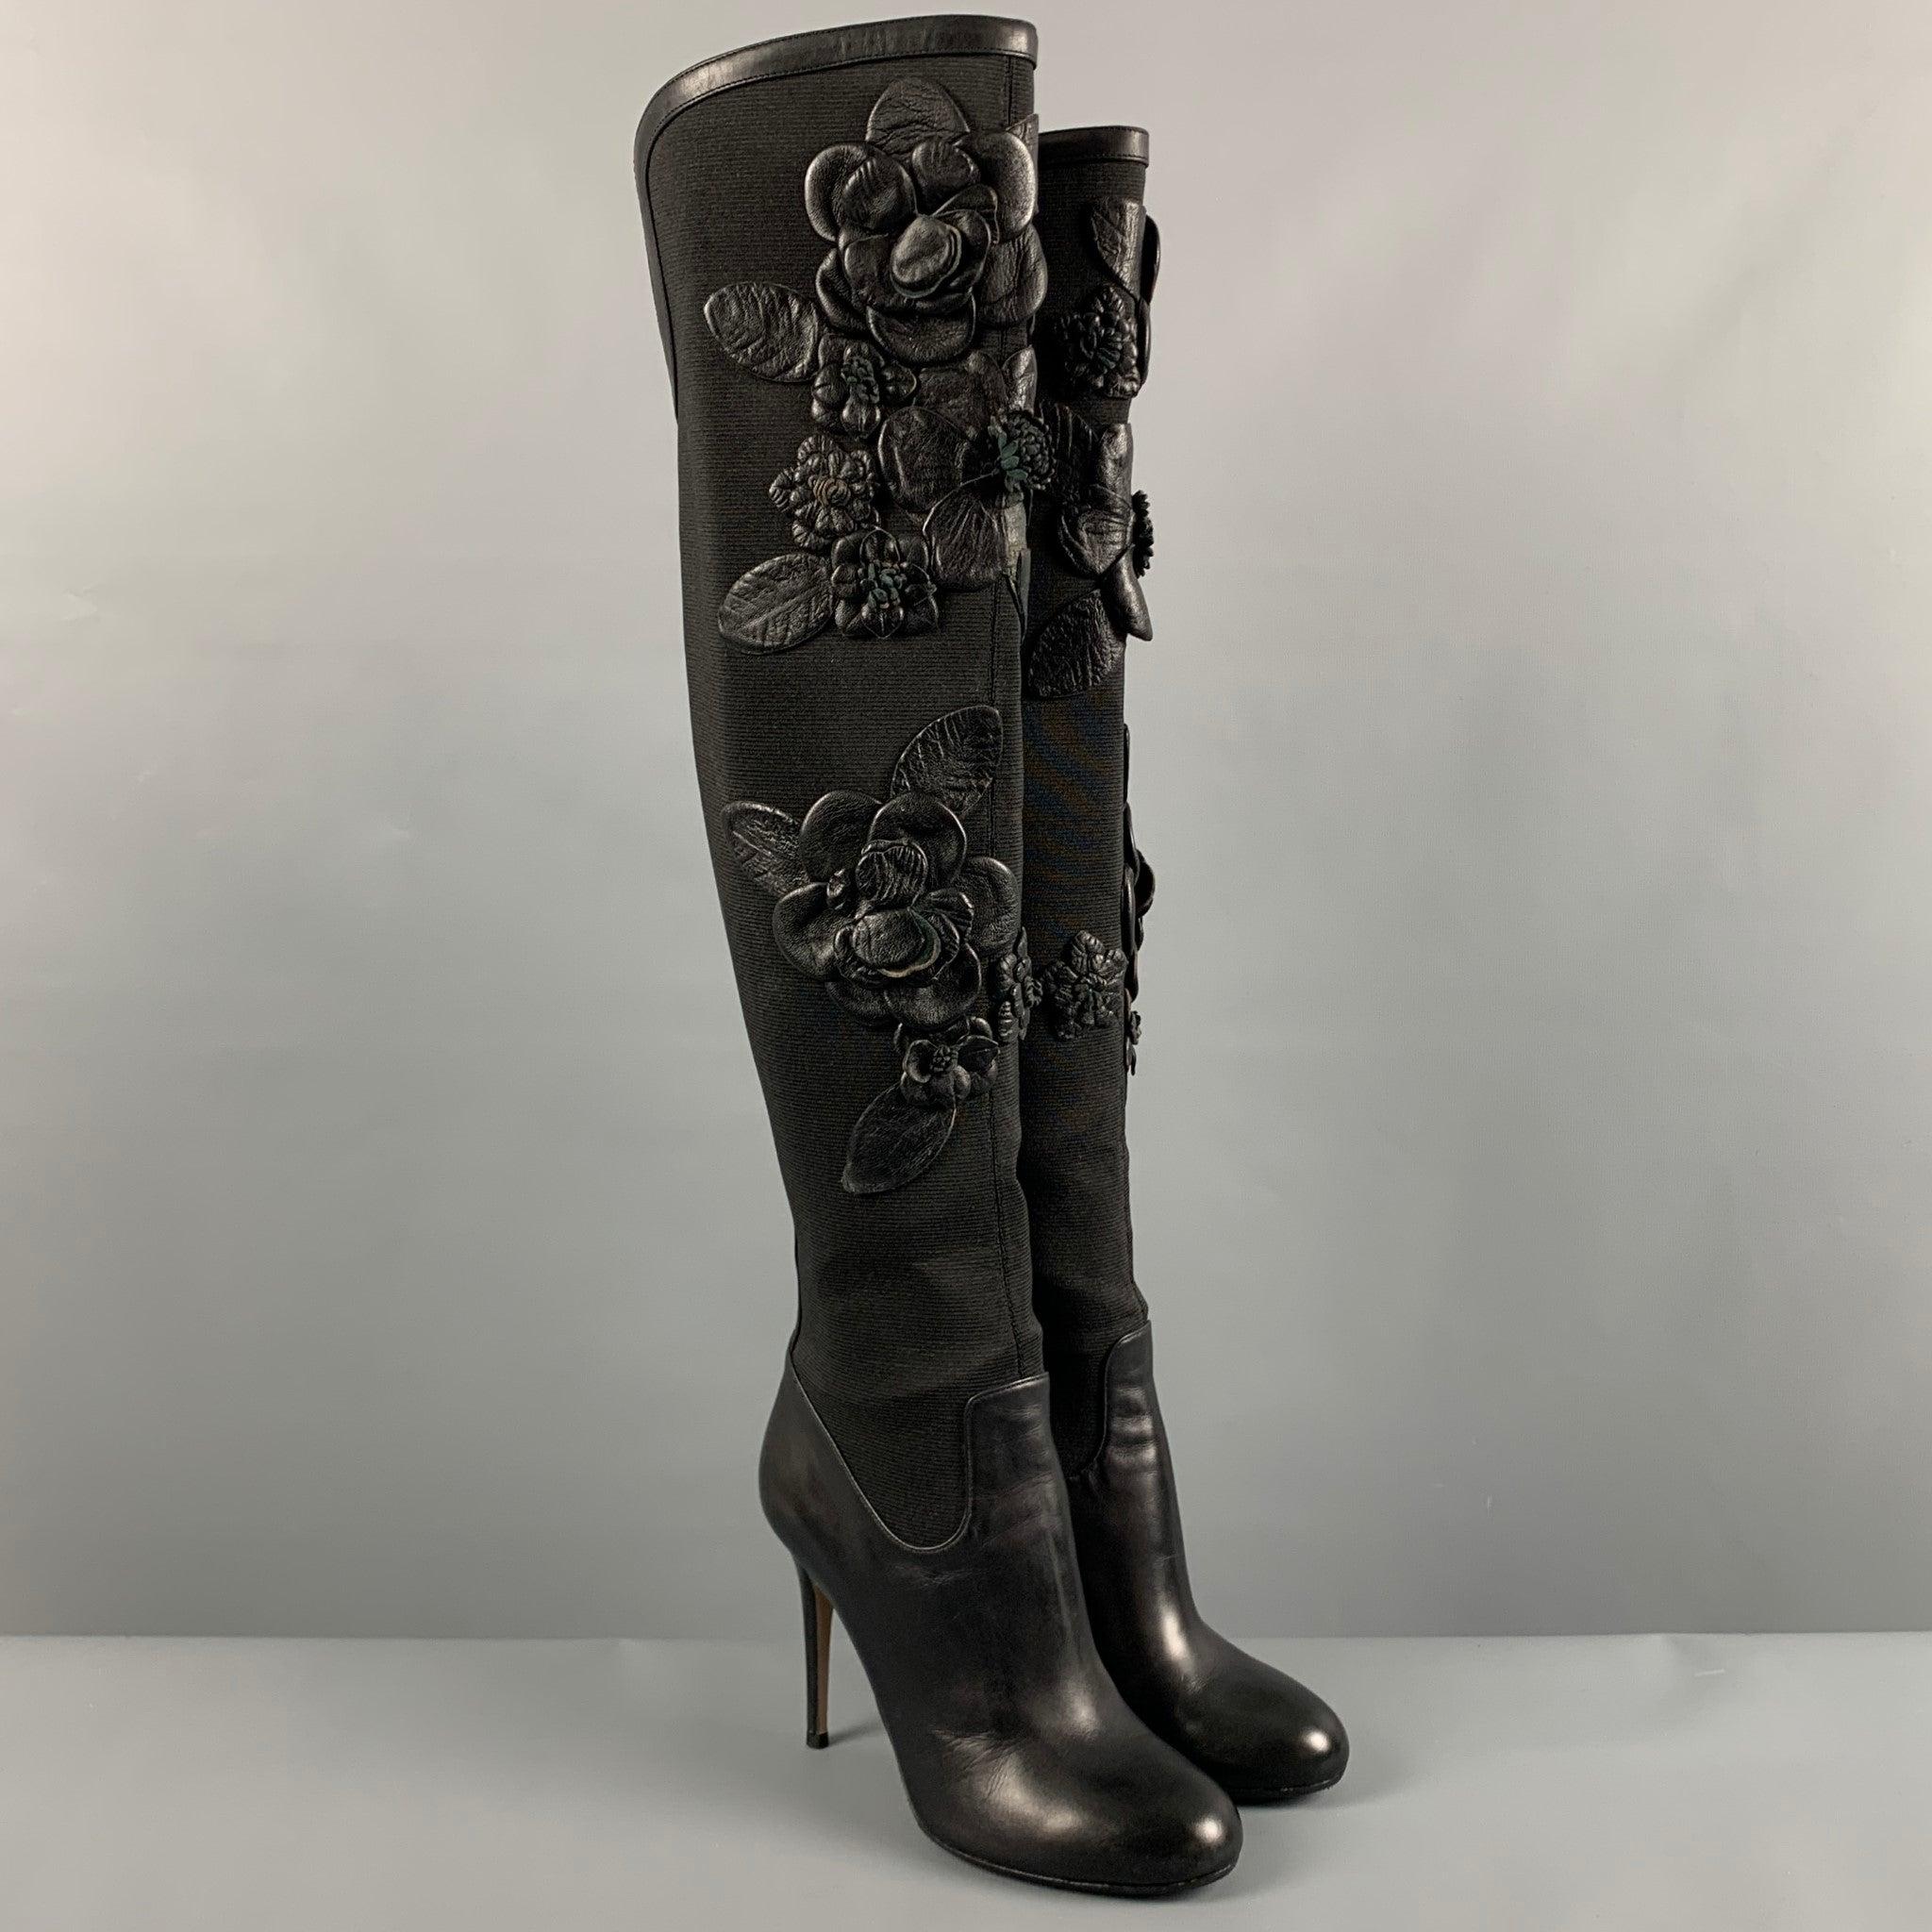 VALENTINO boots in a black nylon featuring over the knee style, leather flower appliques, and a back zipper closure. Made in Italy. Very Good Pre-Owned Condition. Minor signs of wear. 

Marked:   37 

Measurements: 
  Length: 7.5 inches Width: 3